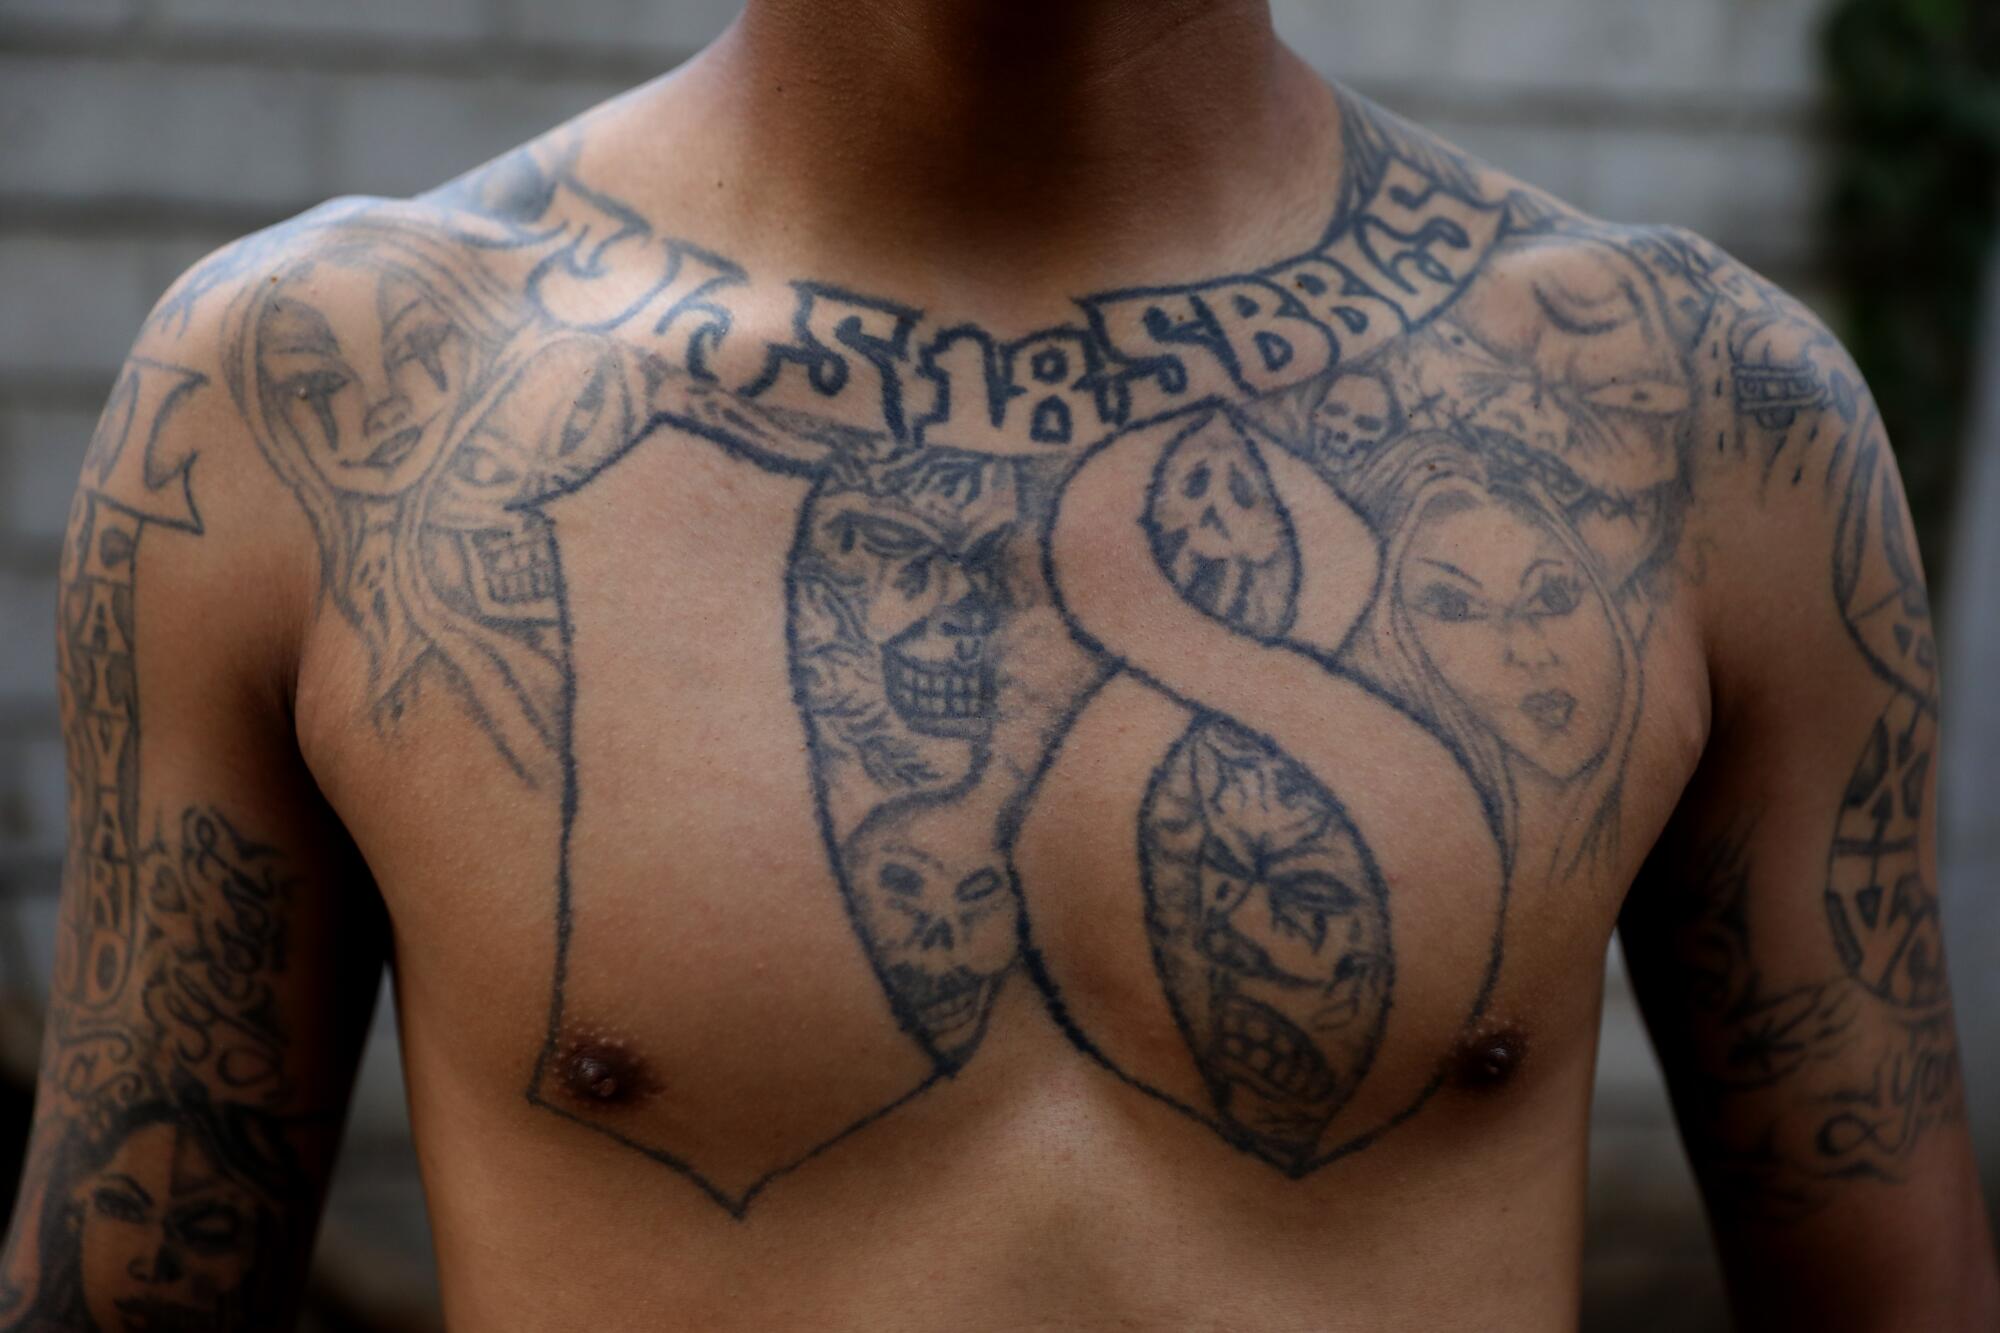 A photo of a man's chest, bearing tattoos, including one of the number 18 